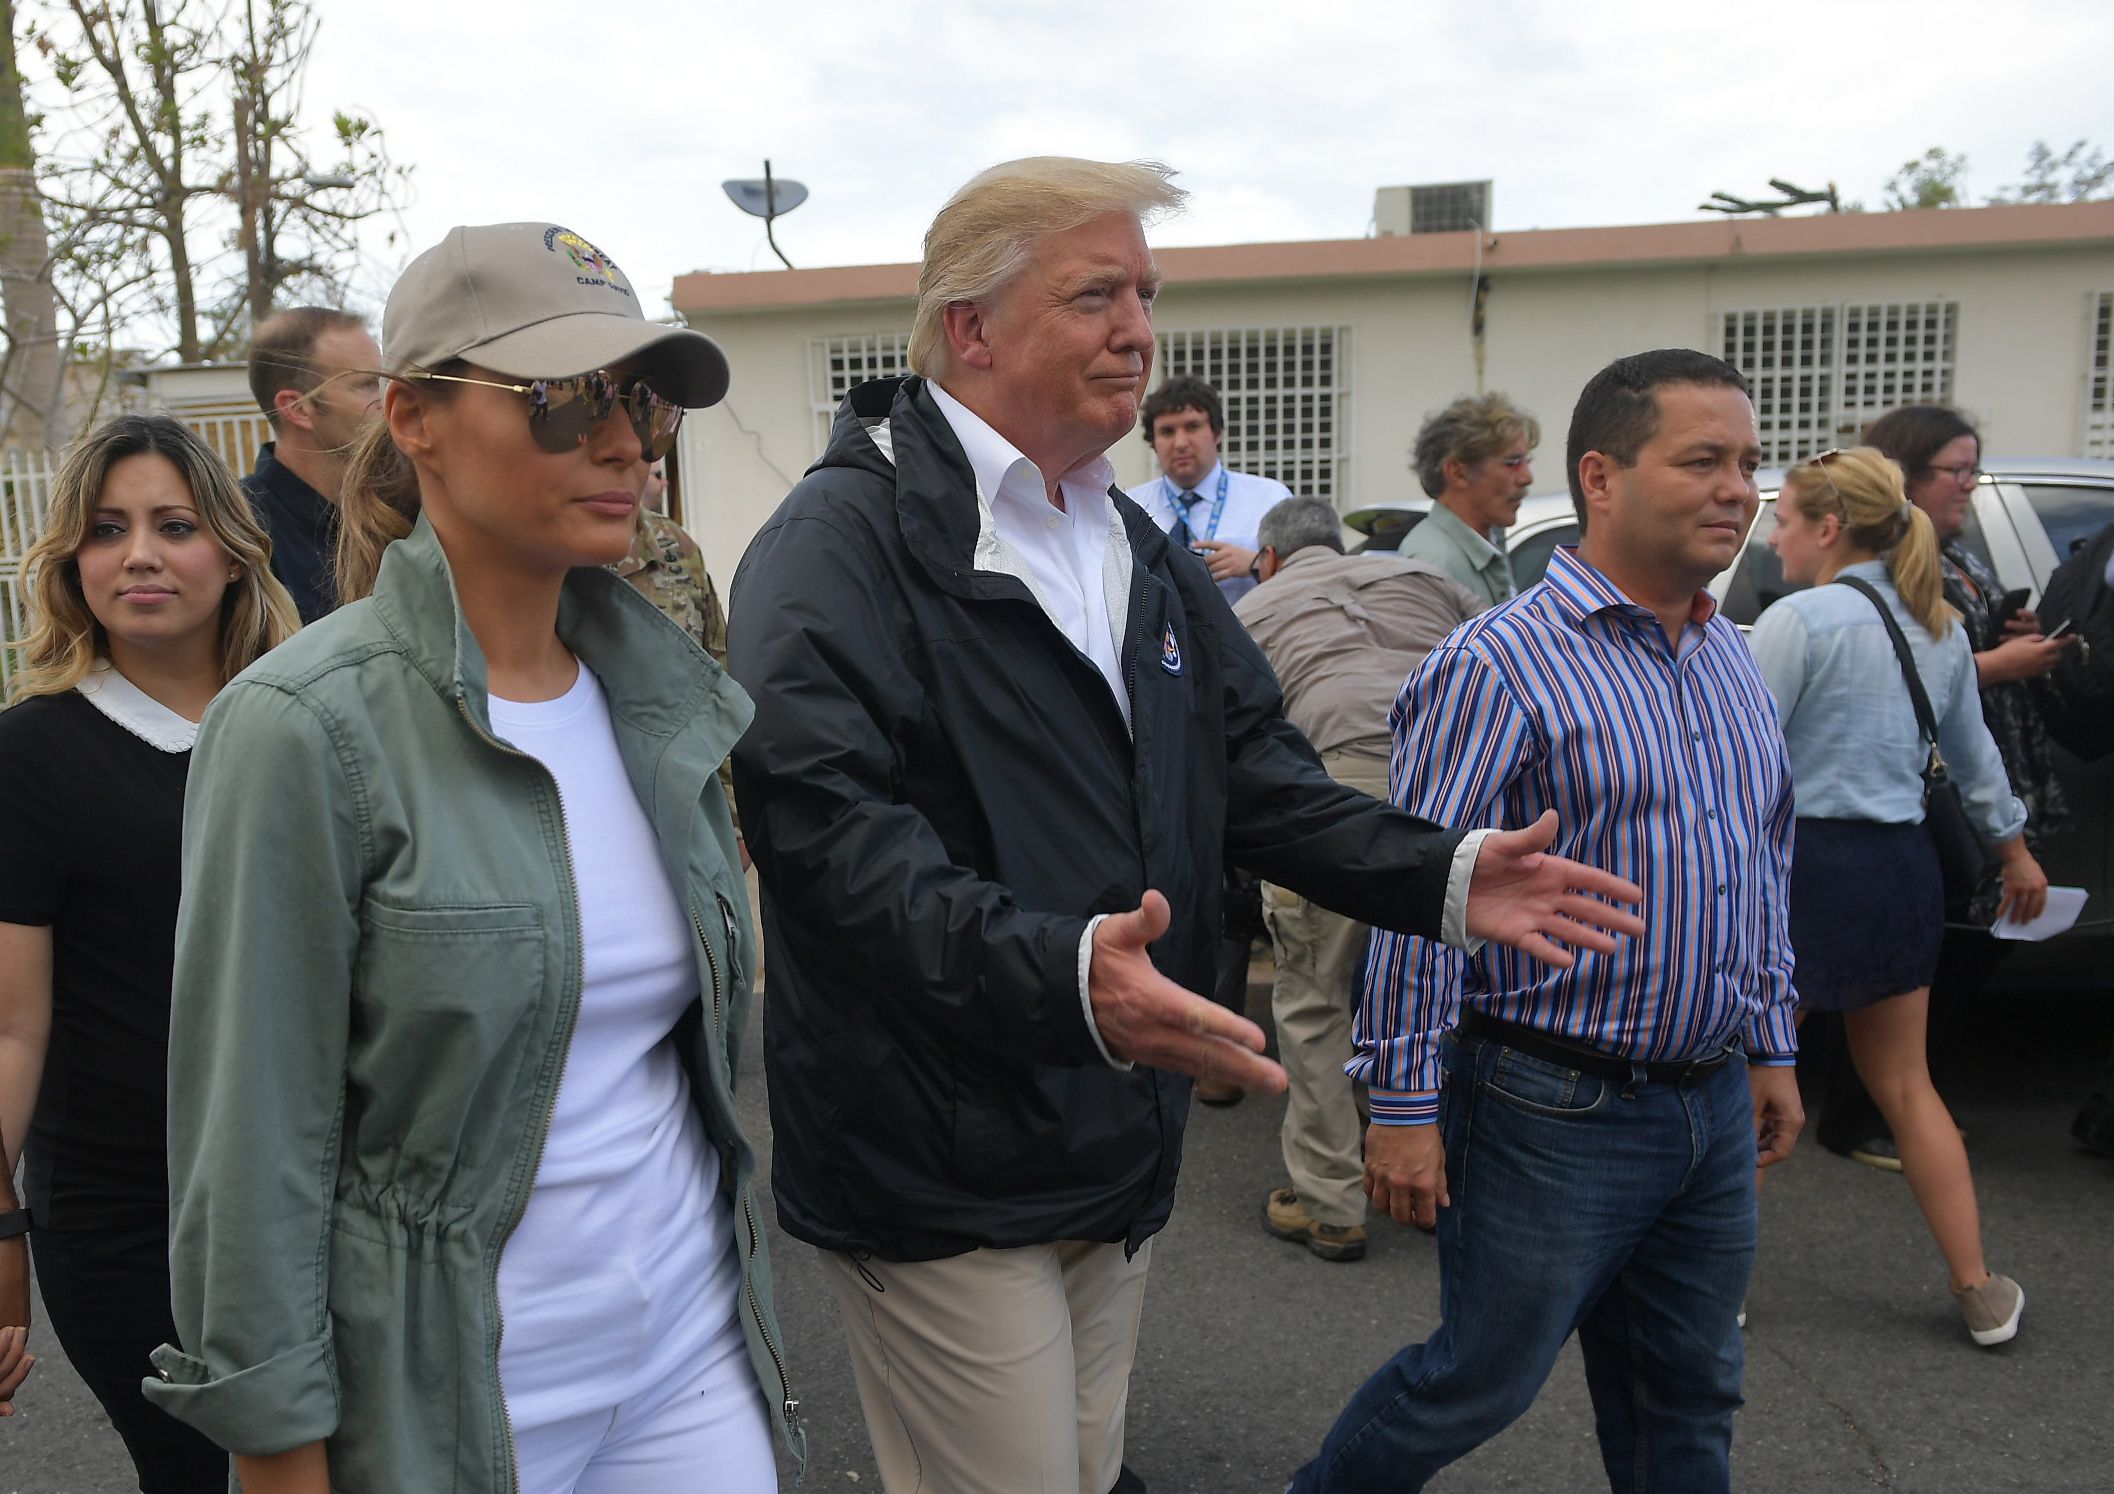 PHOTO: President Donald Trump and First Lady Melania Trump visit residents affected by Hurricane in Guaynabo, west of San Juan, Puerto Rico on Oct. 3, 2017.
